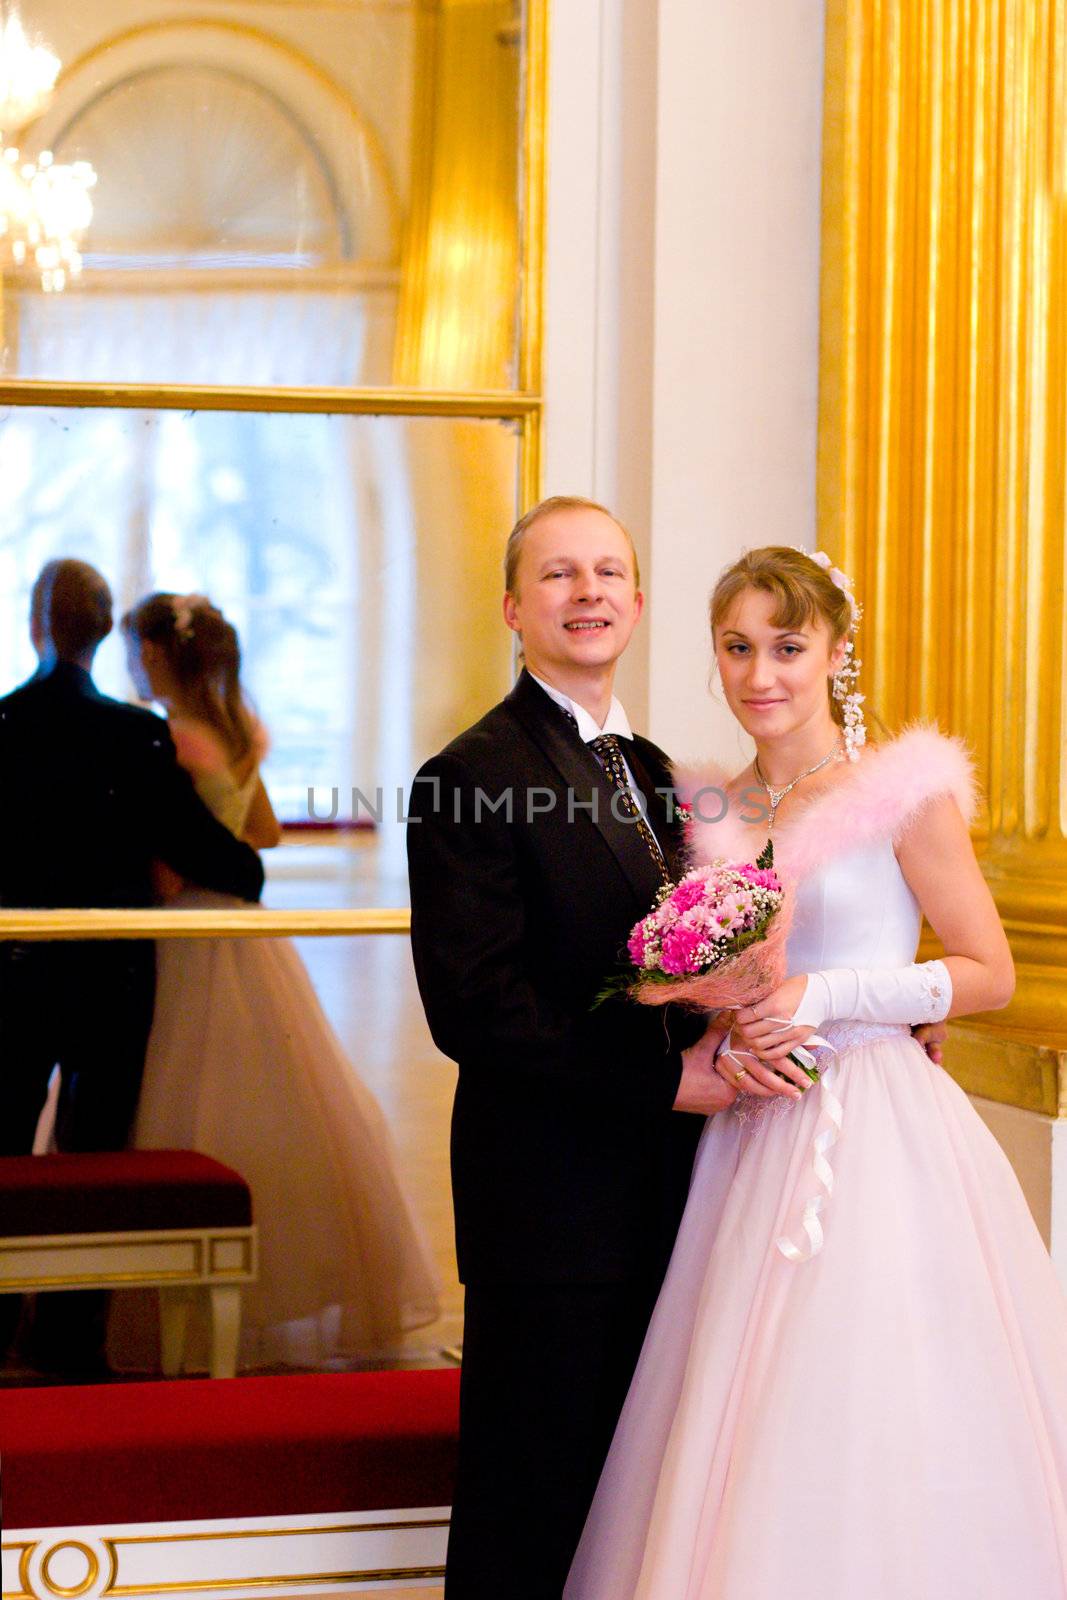 Bride and groom together indoors looking at you